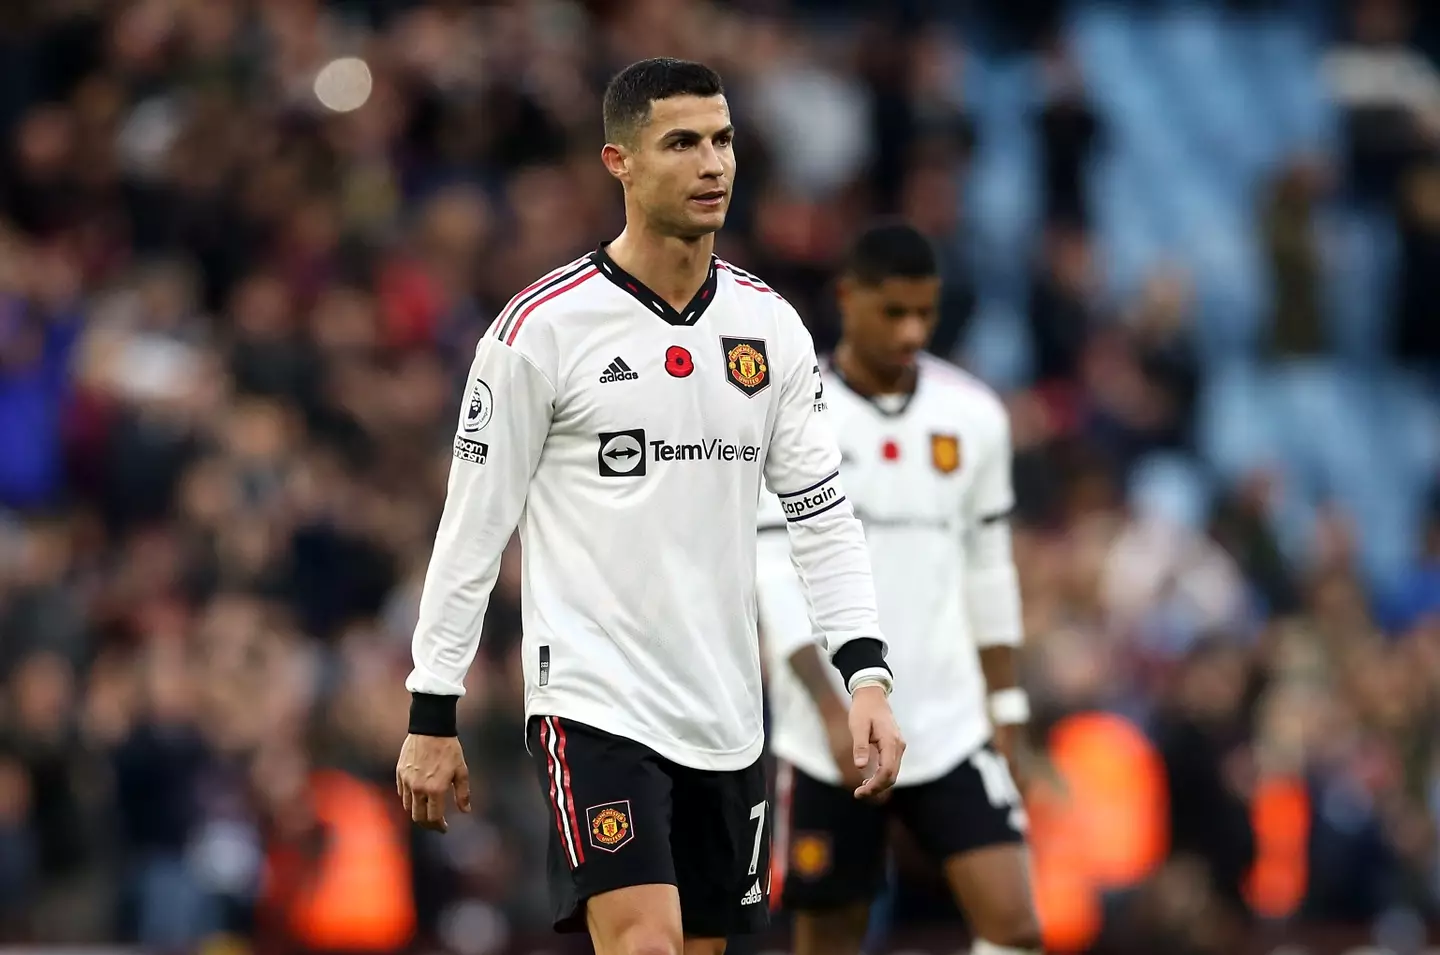 Ronaldo was United captain during his last appearance, a 3-1 defeat to Aston Villa. (Image